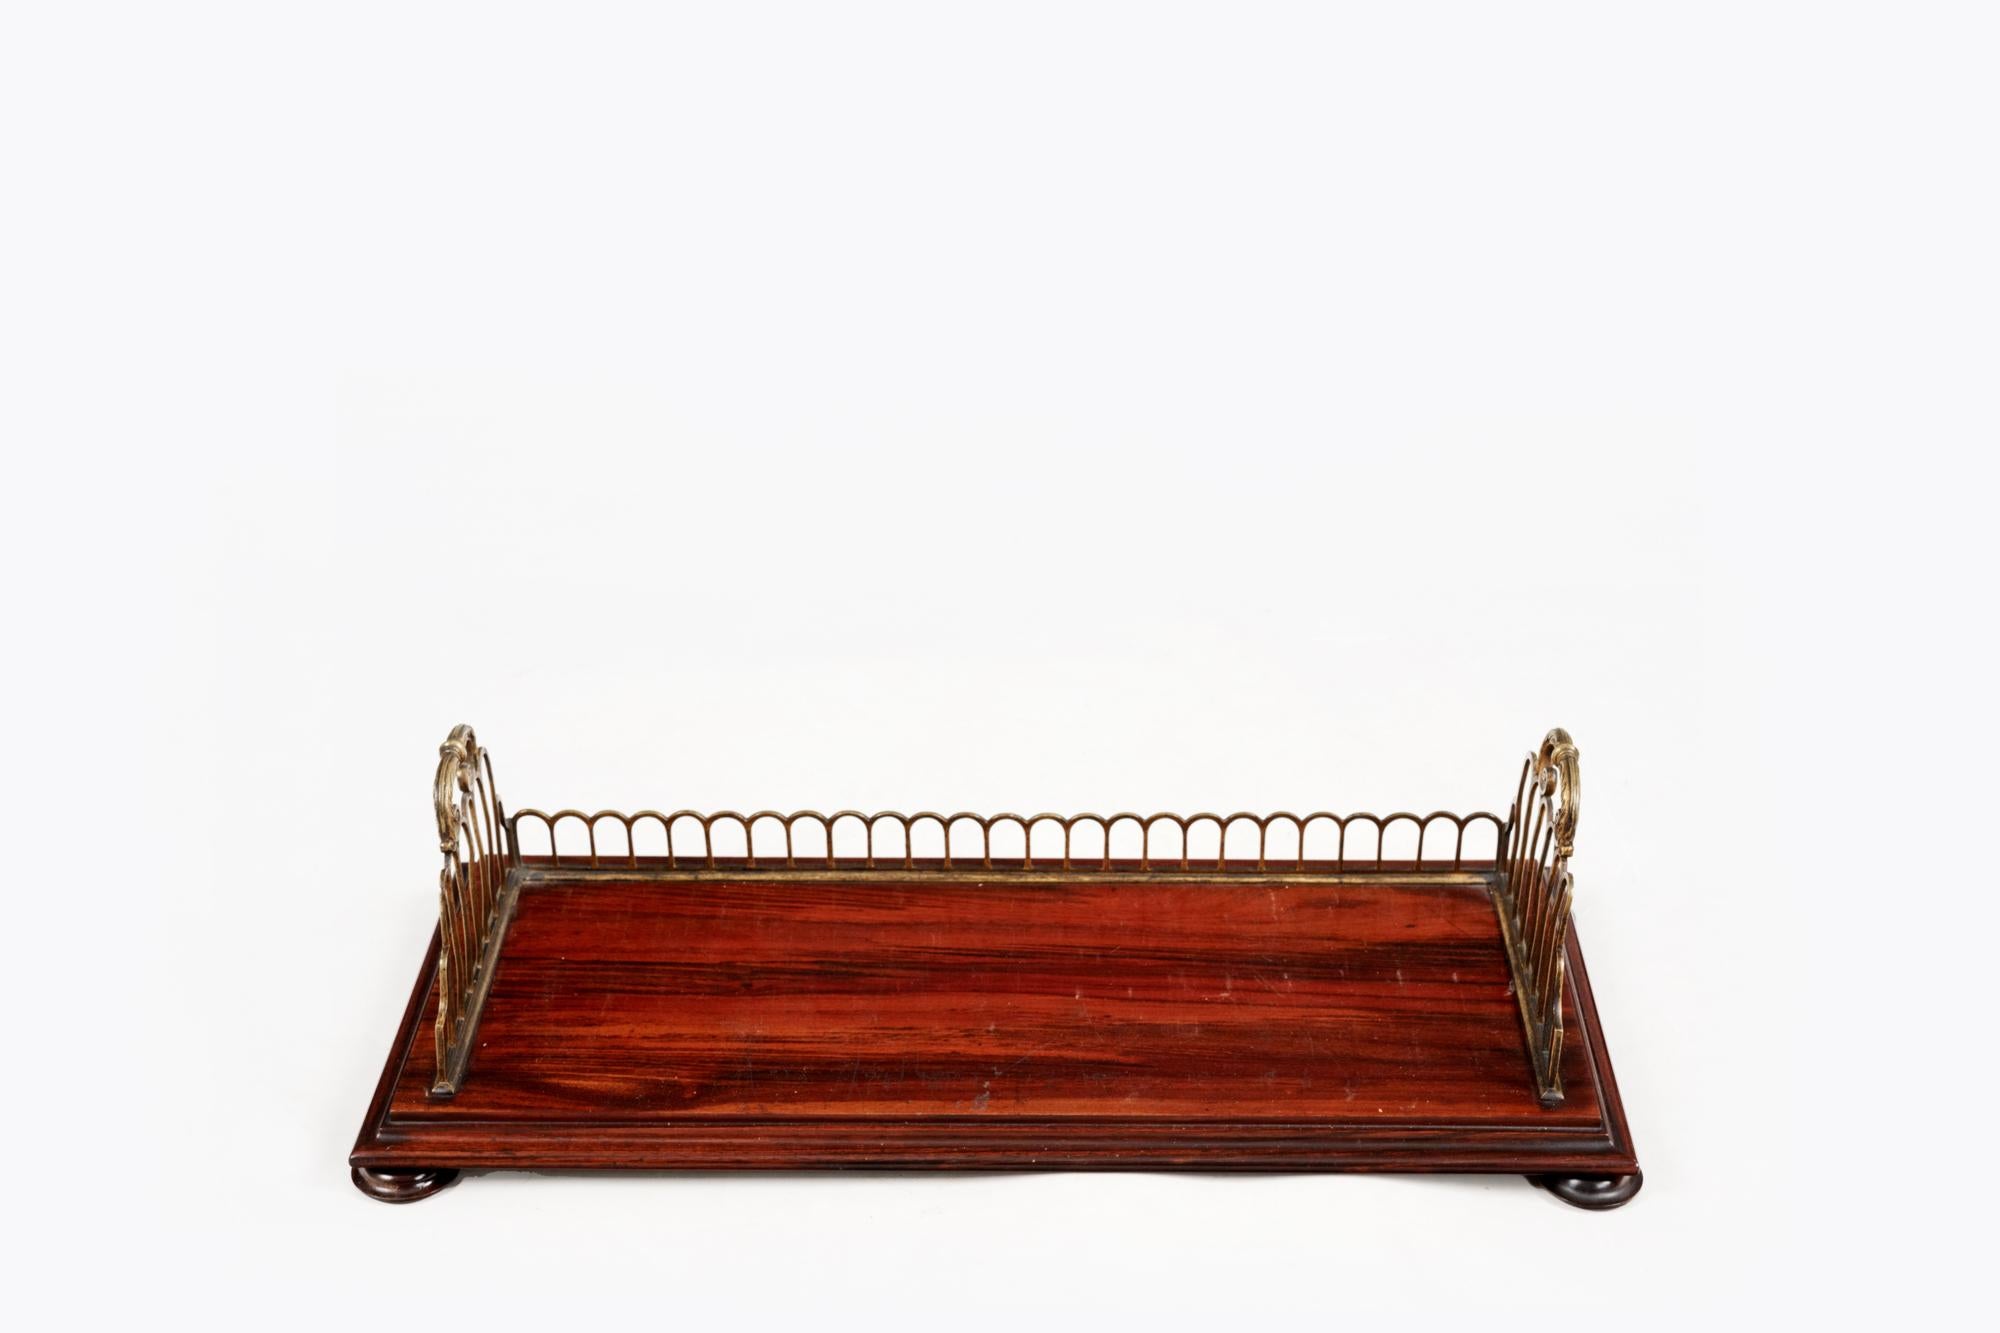 19th Century Regency mahogany book stand with brass gallery sides with scrolled lifting handles, raised on four flat bun feet.